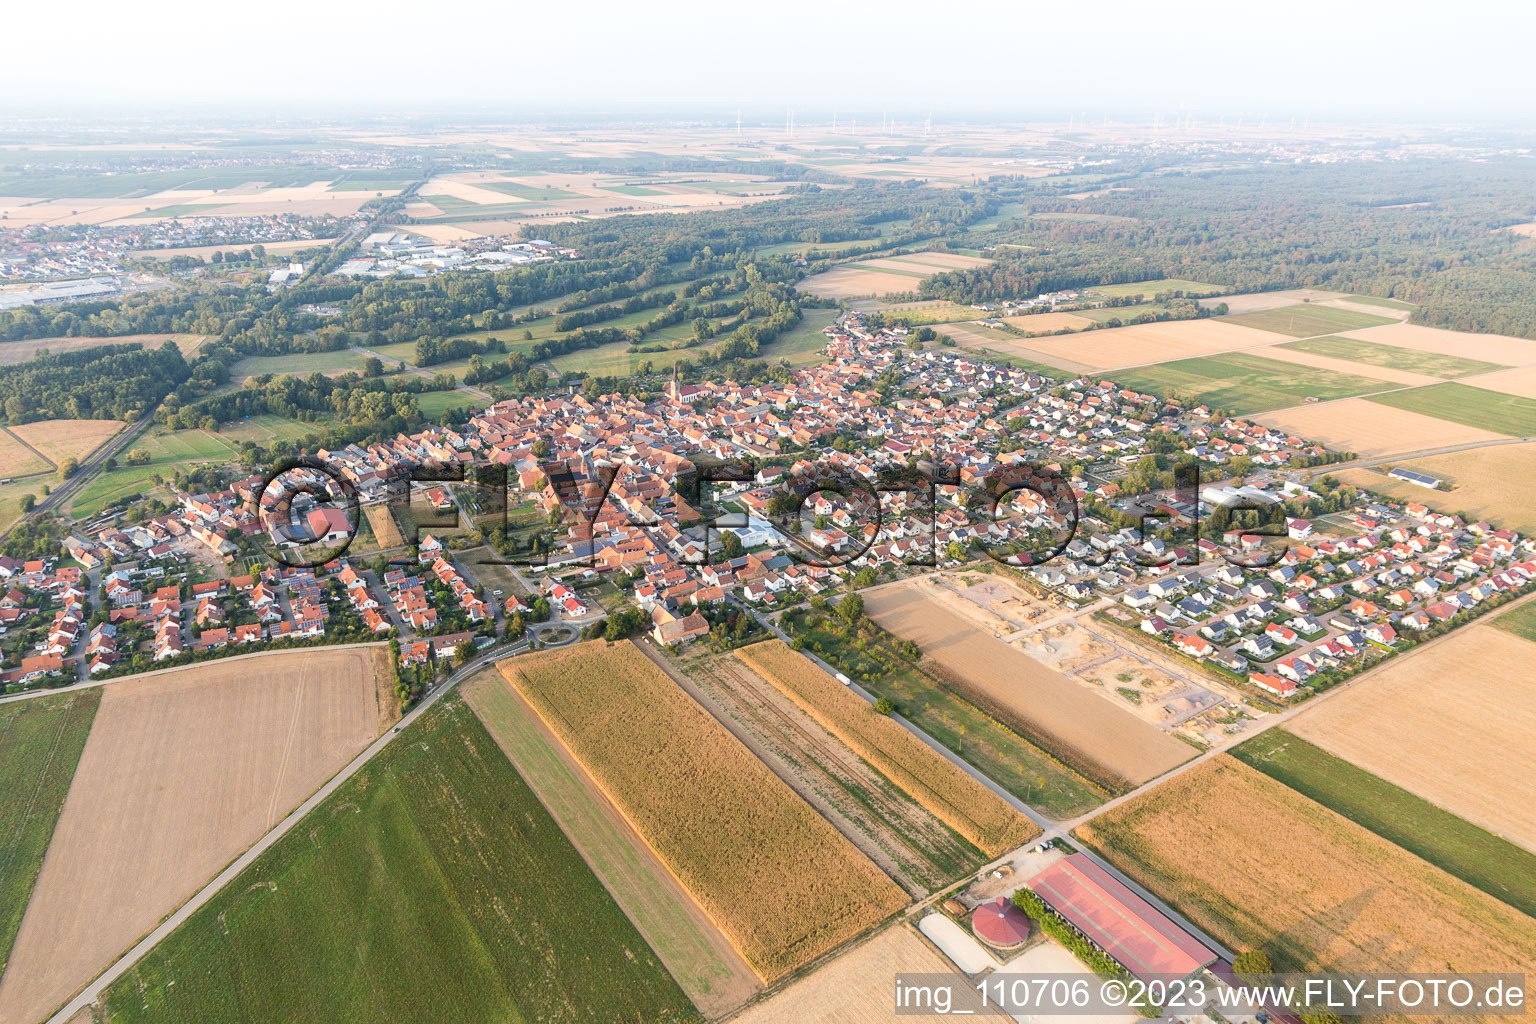 Aerial view of Expansion of the new Brotäcker development area in Steinweiler in the state Rhineland-Palatinate, Germany